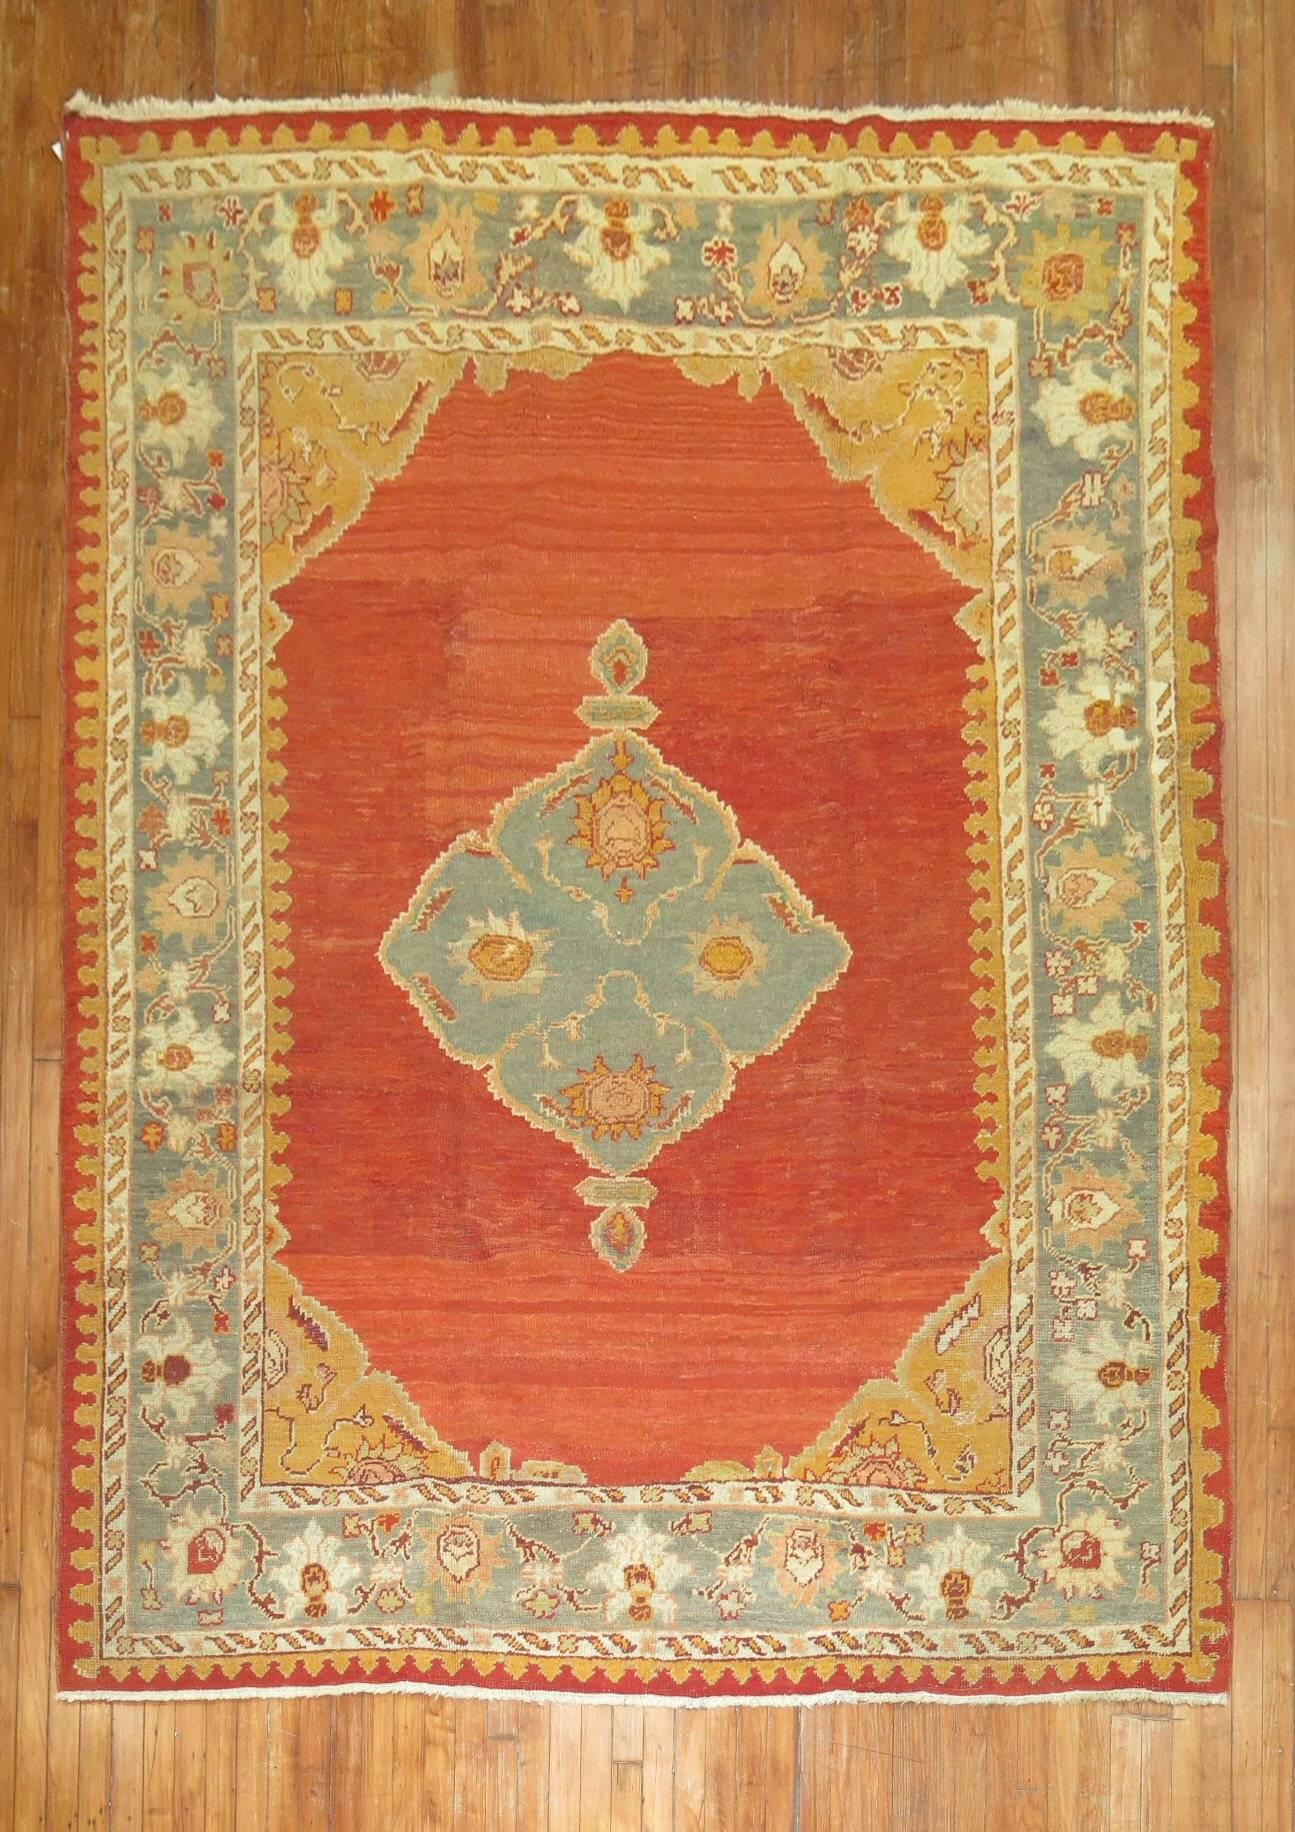 A pleasant antique Turkish Oushak brilliantly done in a tomato red ground, sage green border and central medallion with White and bronze color accents included.

7'3'' x 10'